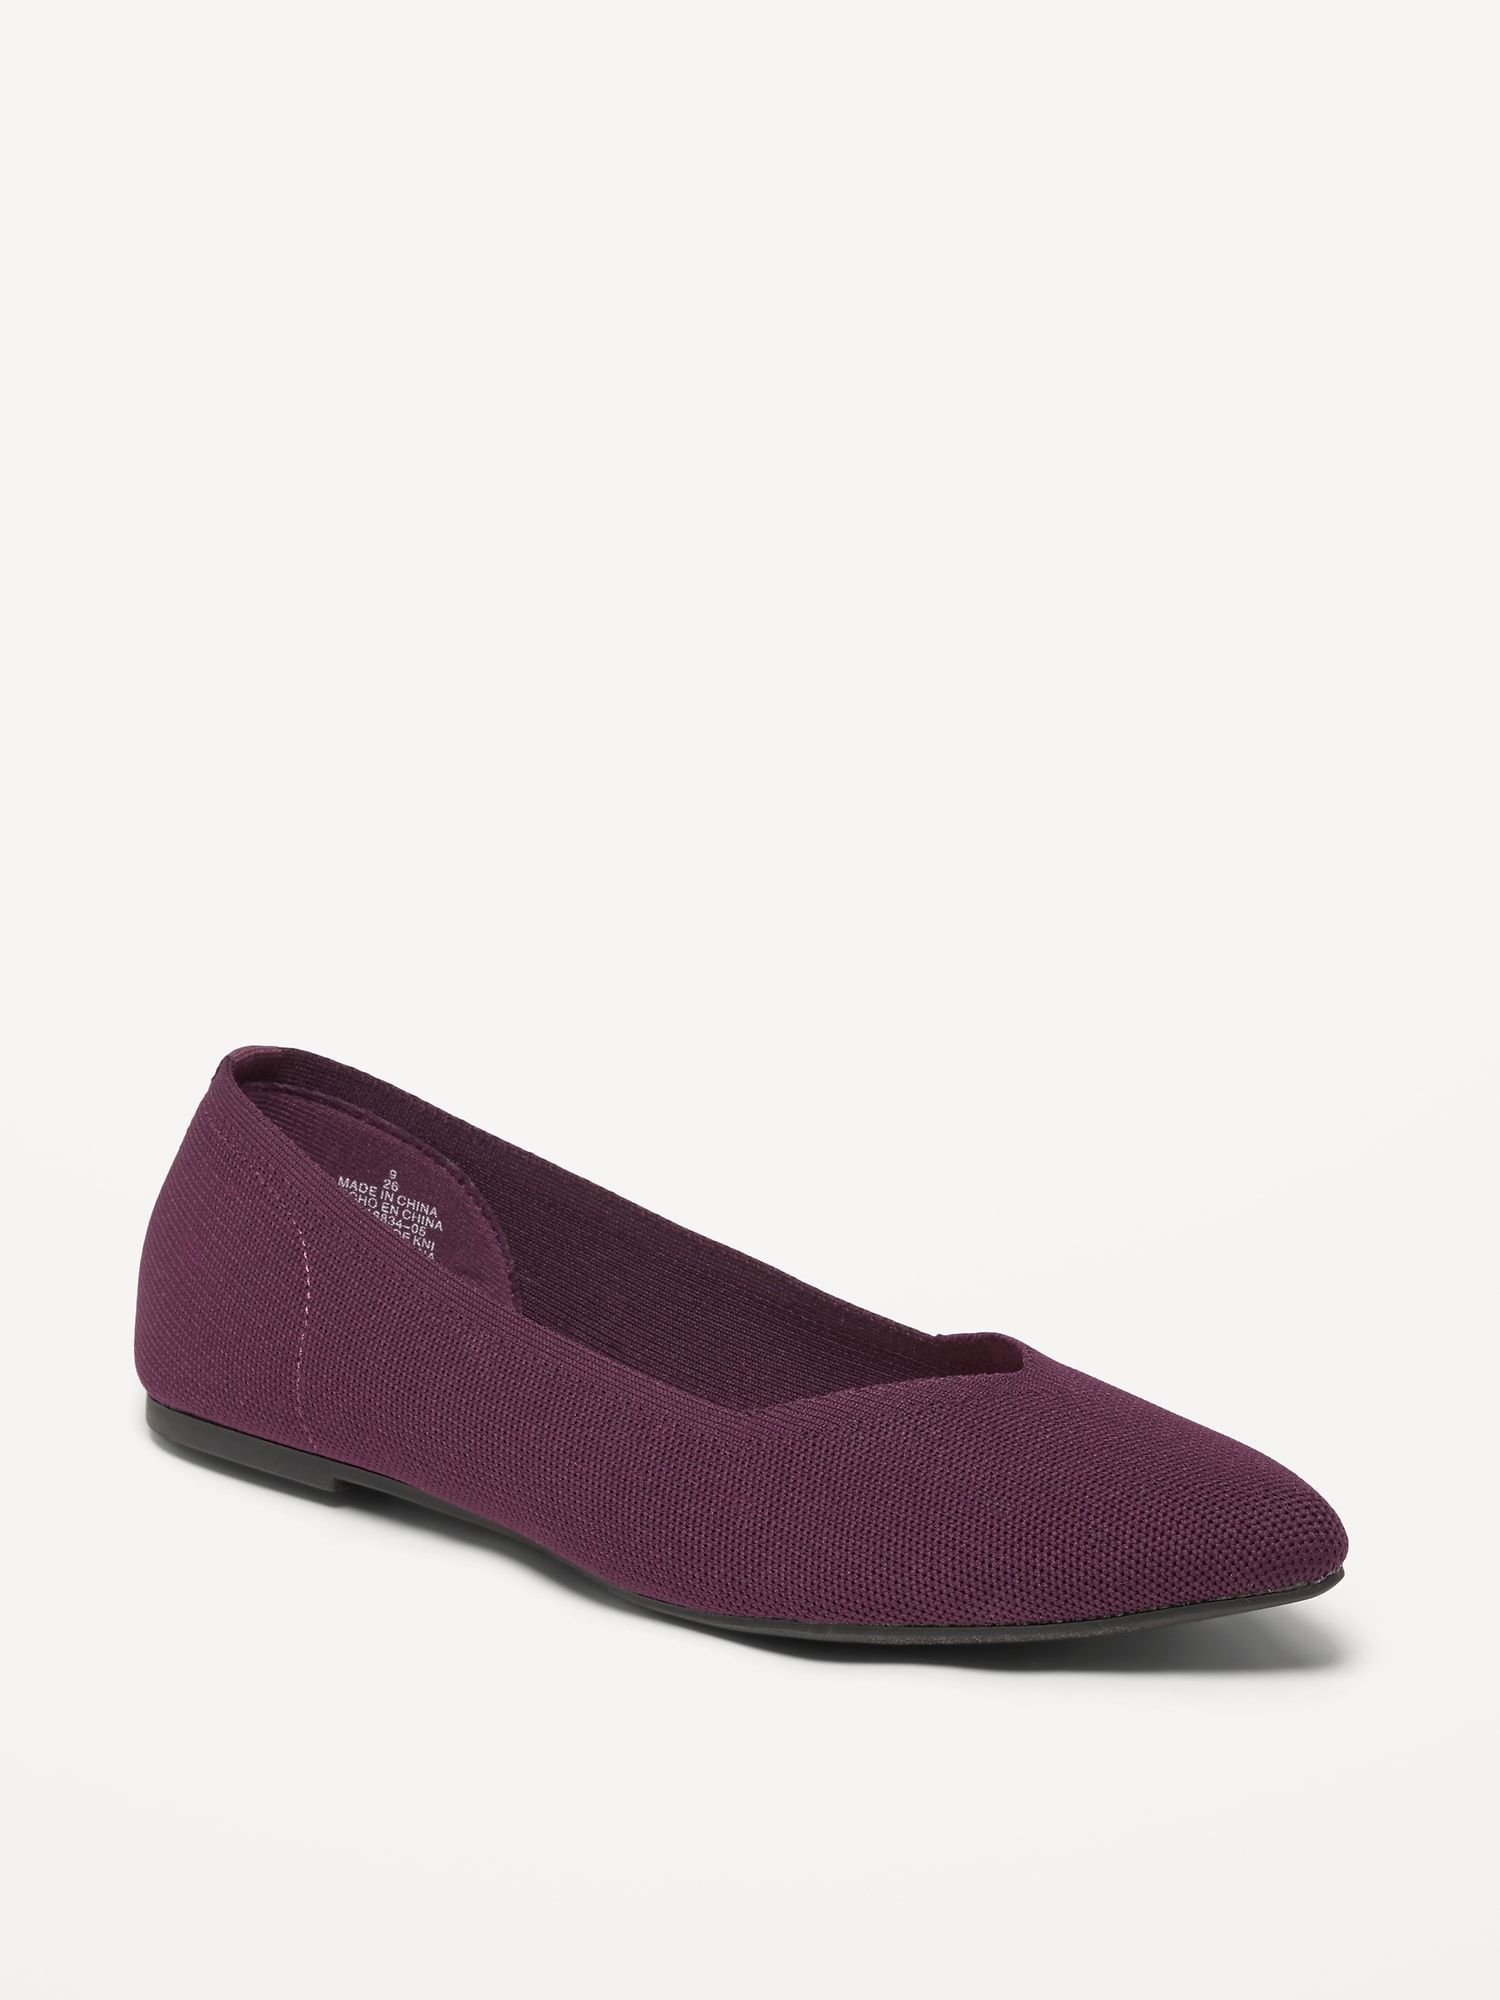 Textured-Knit Pointy-Toe Ballet Flats